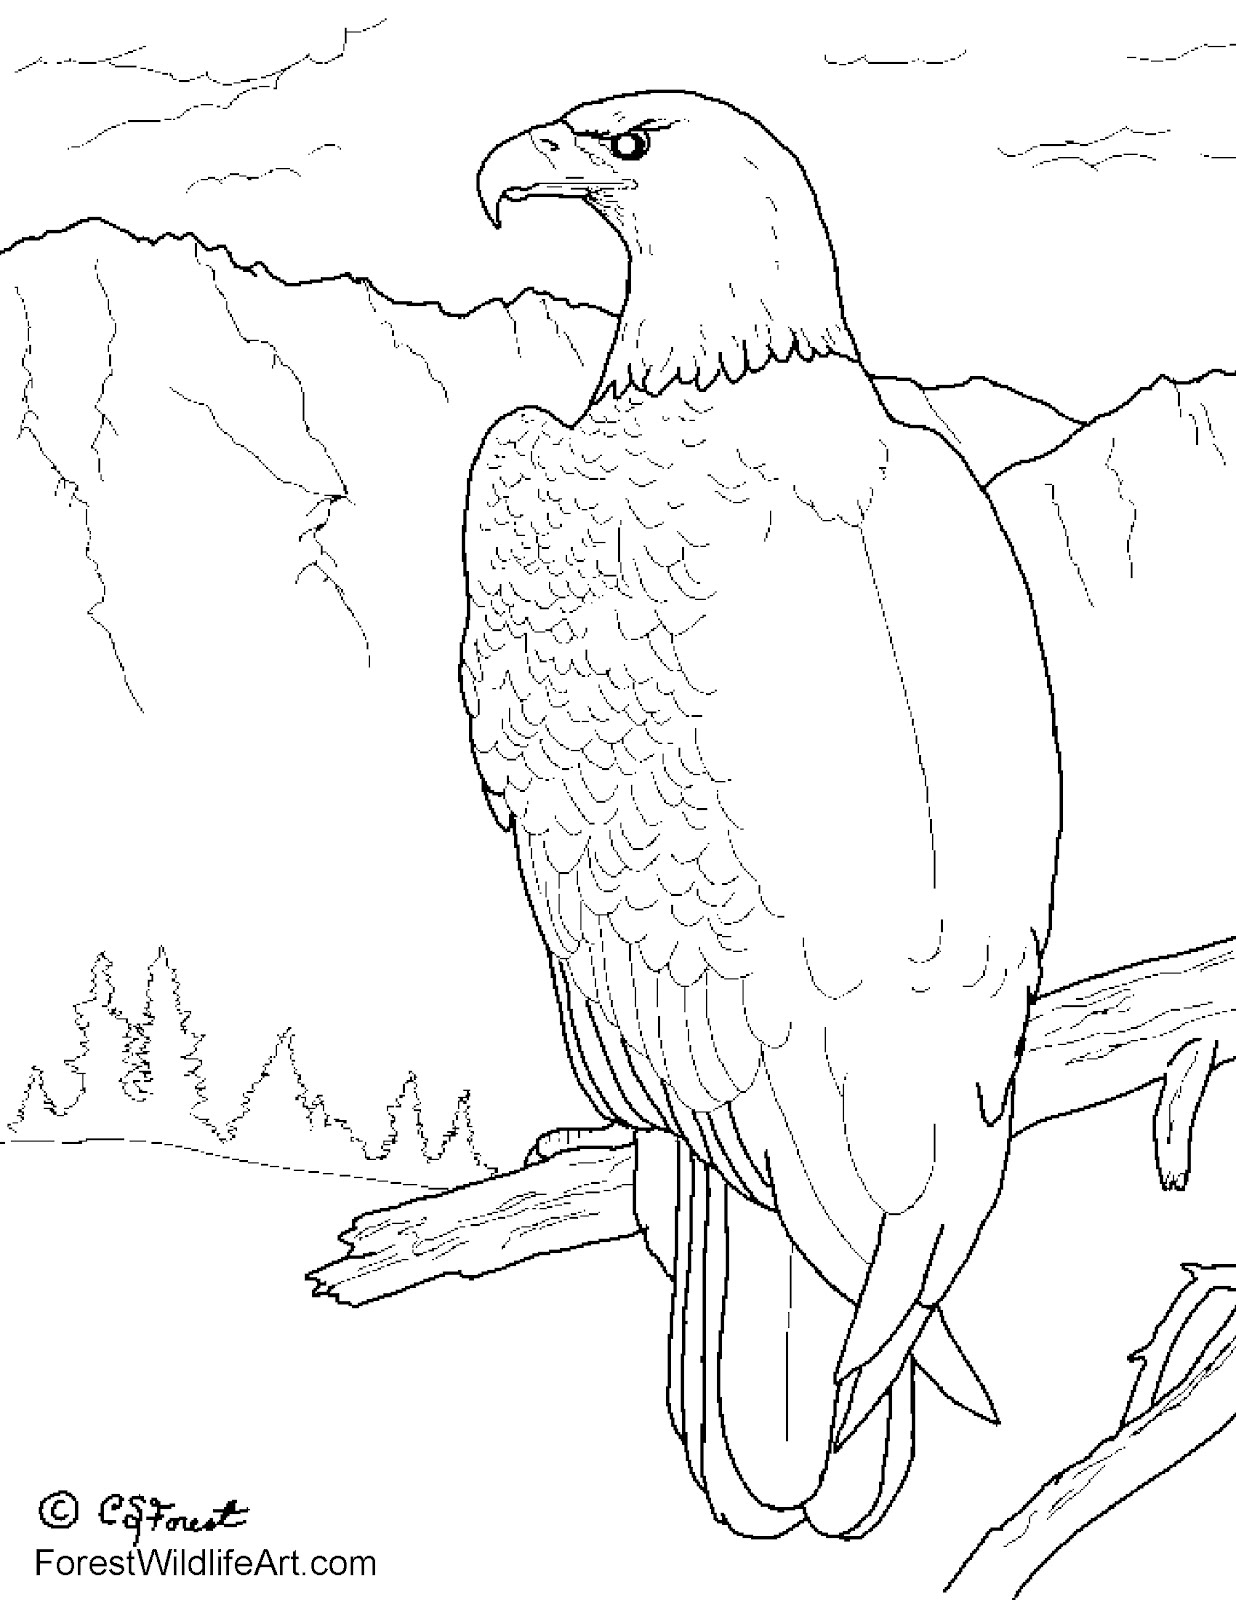 Crista Forest's Animals & Art: Bald Eagle Coloring Book Page